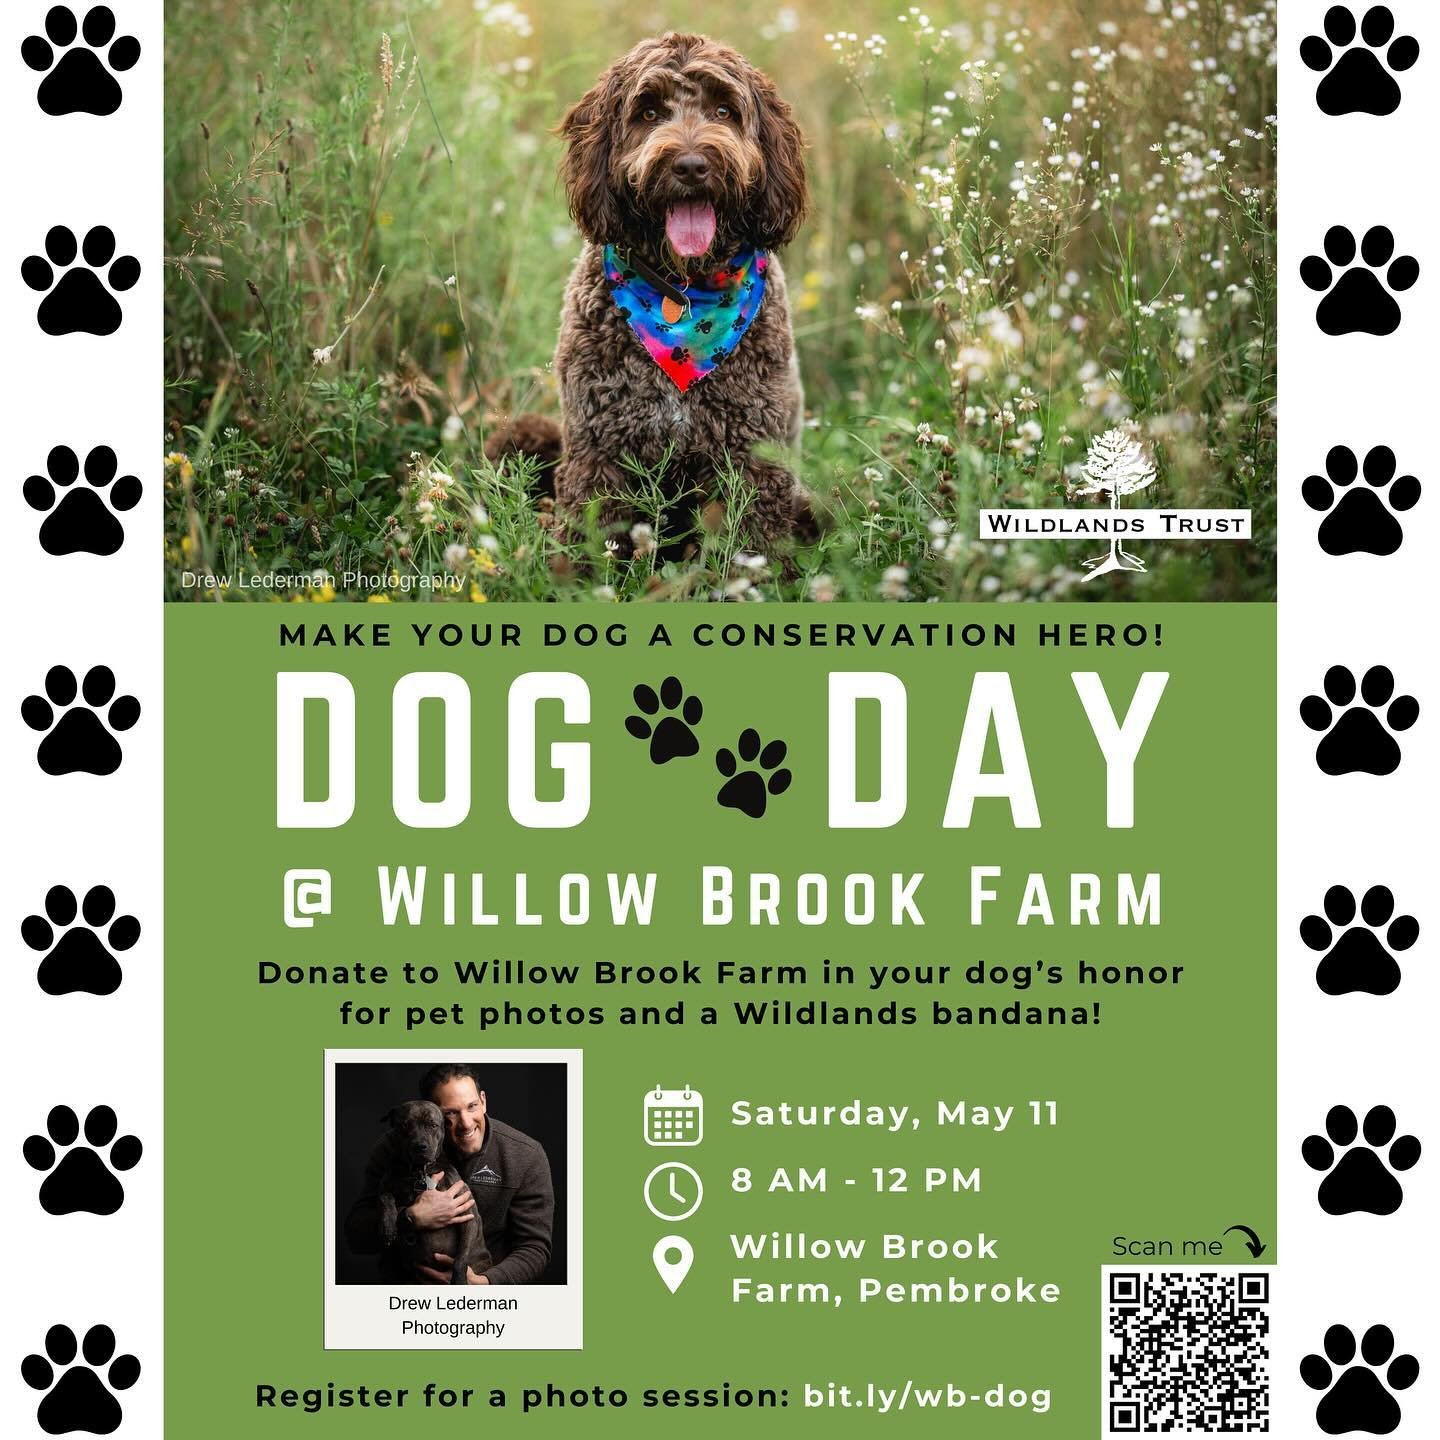 𝐓𝐨𝐦𝐨𝐫𝐫𝐨𝐰! Drop by Willow Brook Farm in Pembroke to support our restoration campaign and receive professional photos of your dog(s), courtesy of local photographer @drew_lederman! 📸🐶

Thanks to Drew's generosity, 𝐚𝐥𝐥 𝐩𝐫𝐨𝐜𝐞𝐞𝐝𝐬 from